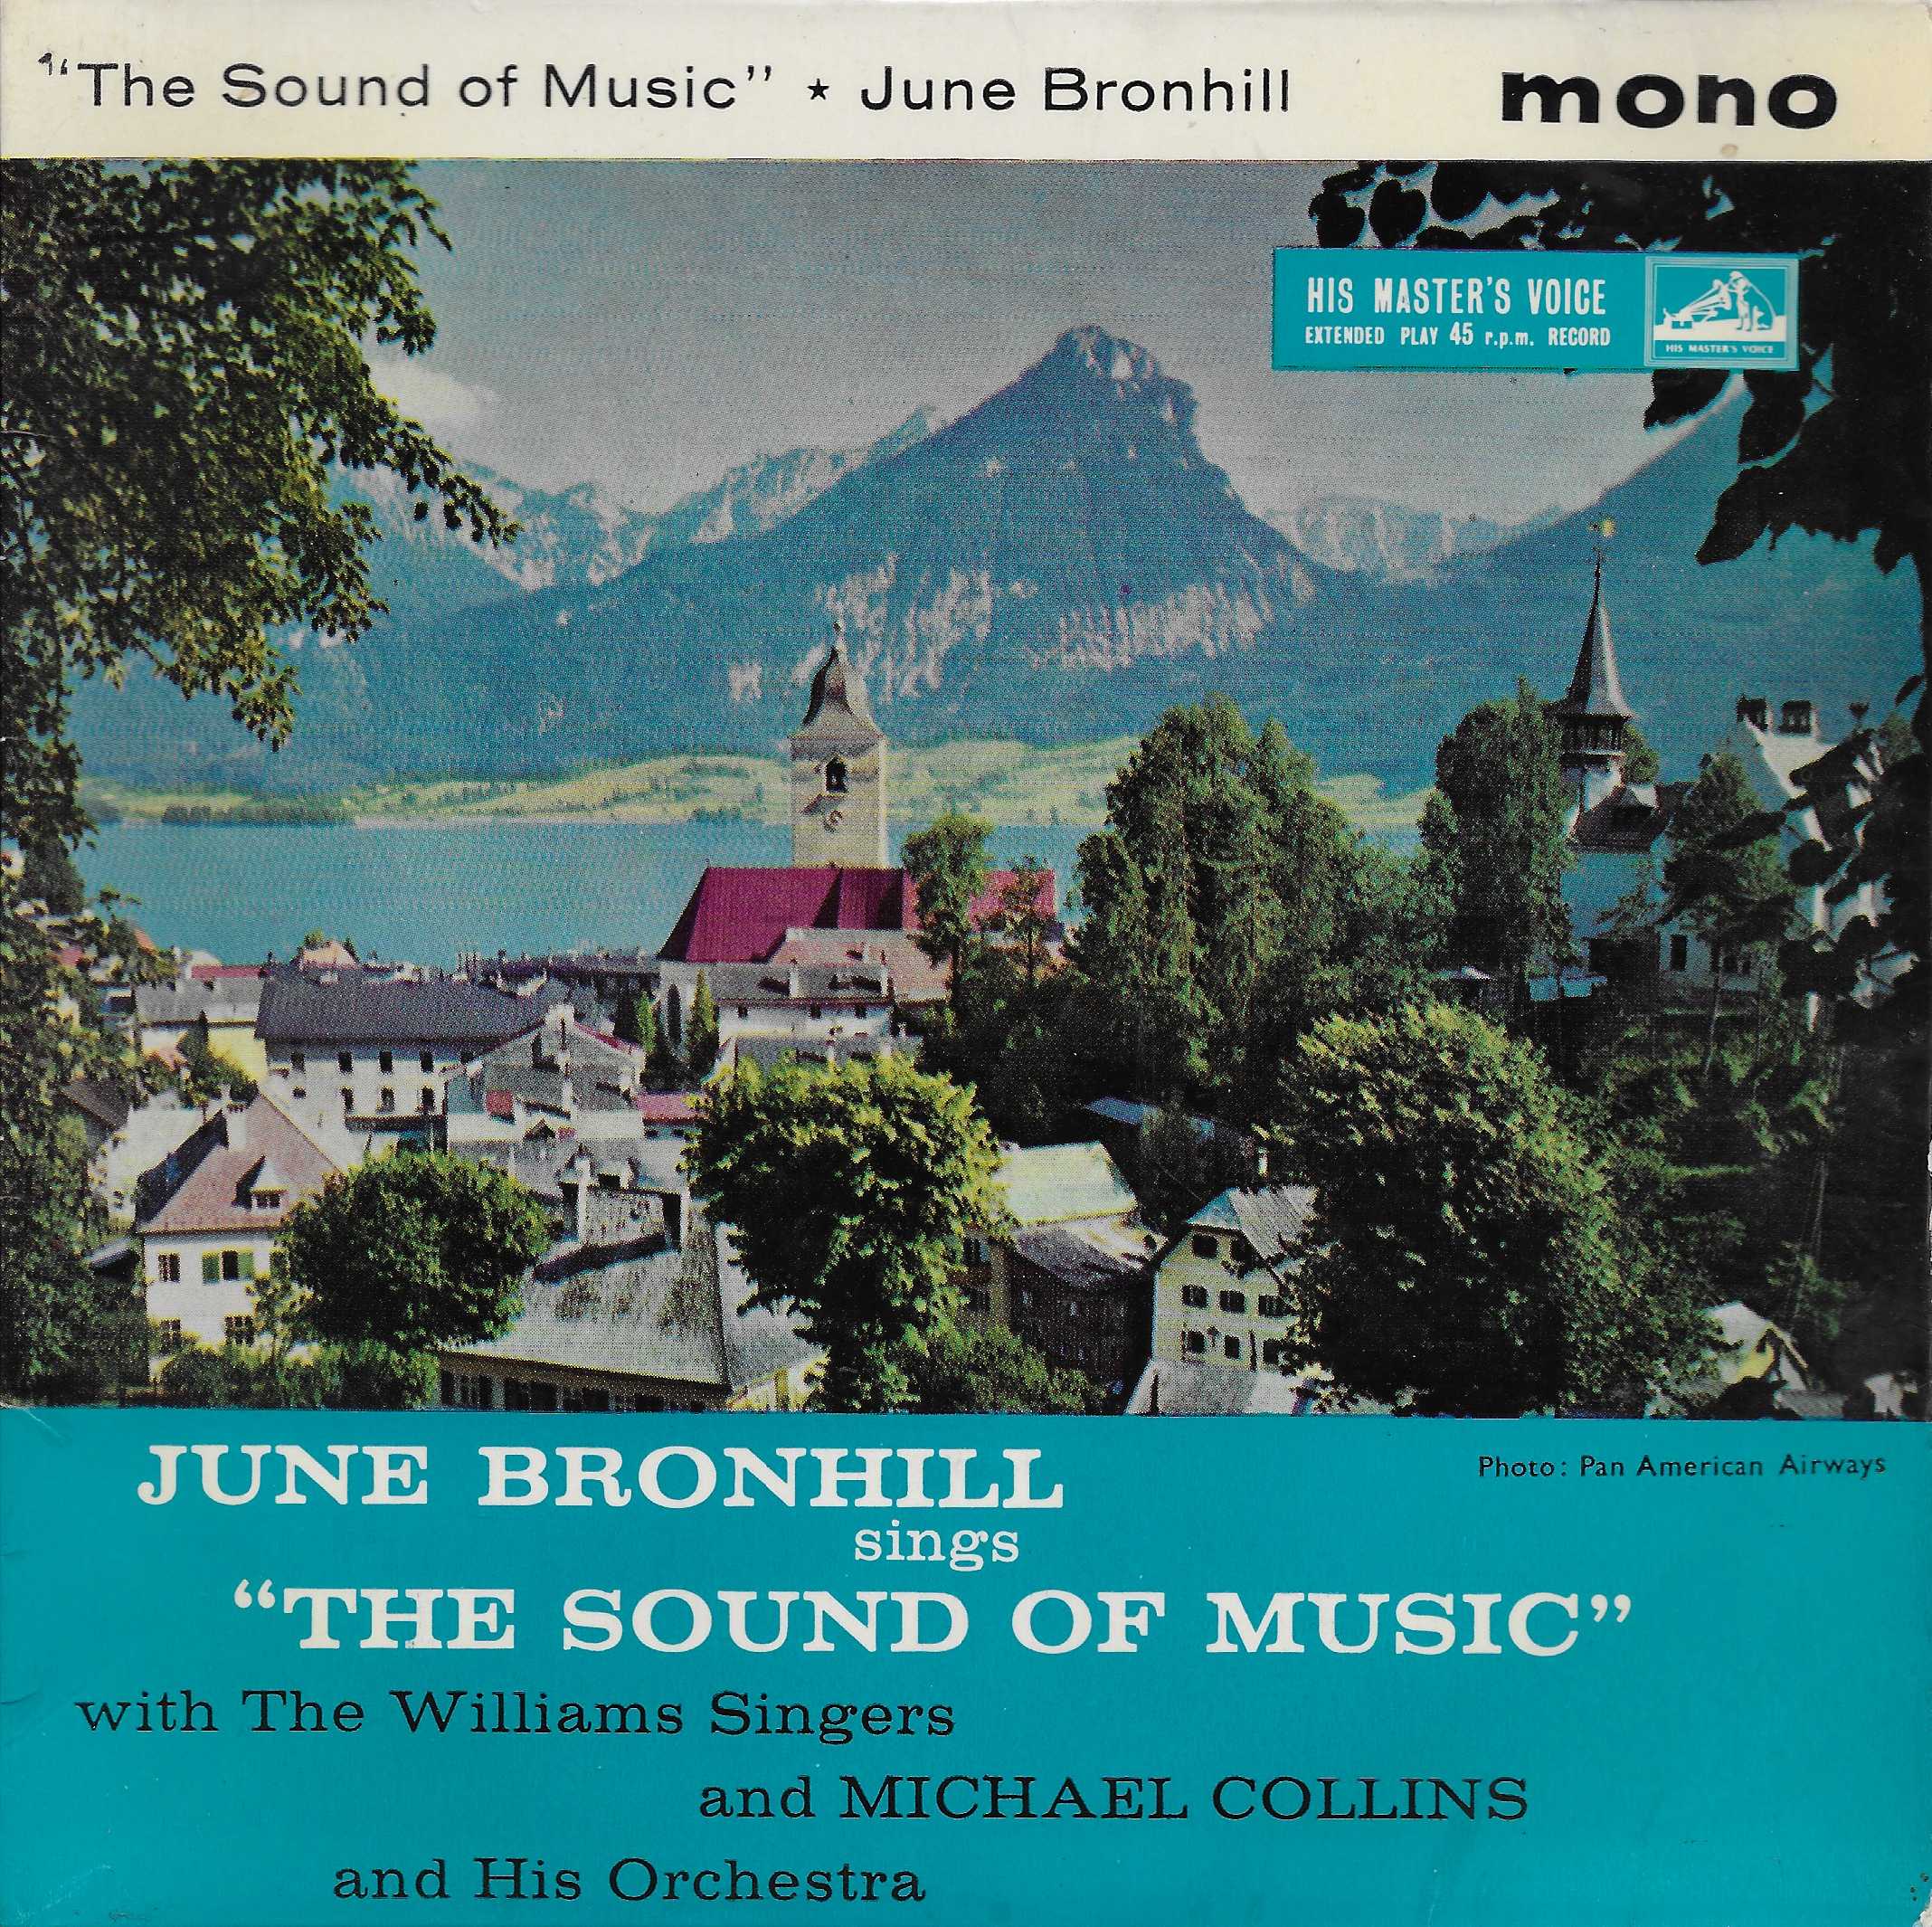 Picture of The sound of music by artist Rogers / Hammerstein II / June Bronhill with the Williams Singers and Michael Collins and his orchestra from ITV, Channel 4 and Channel 5 singles library